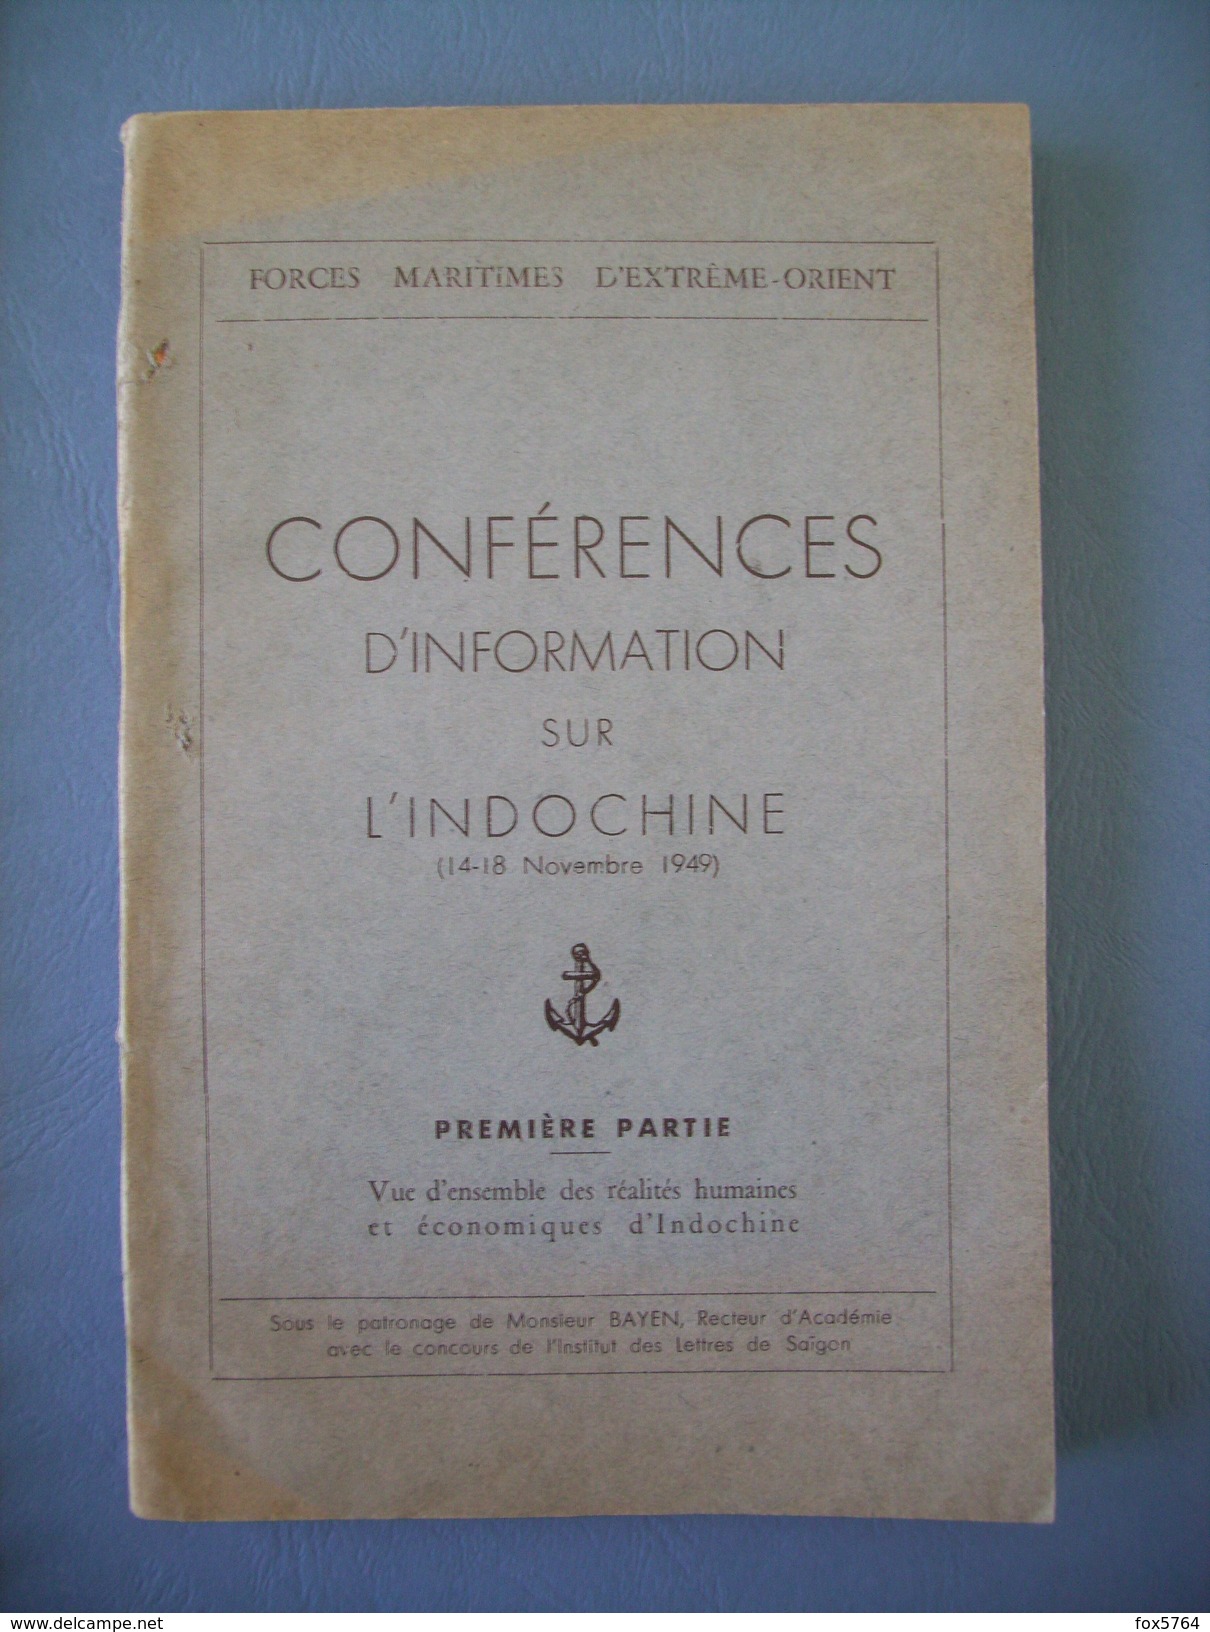 INDOCHINE / CONFERENCE INFORMATION / EXTREME-ORIENT / FMEO / édition ORIGINALE 1949 / 1 - Documentos